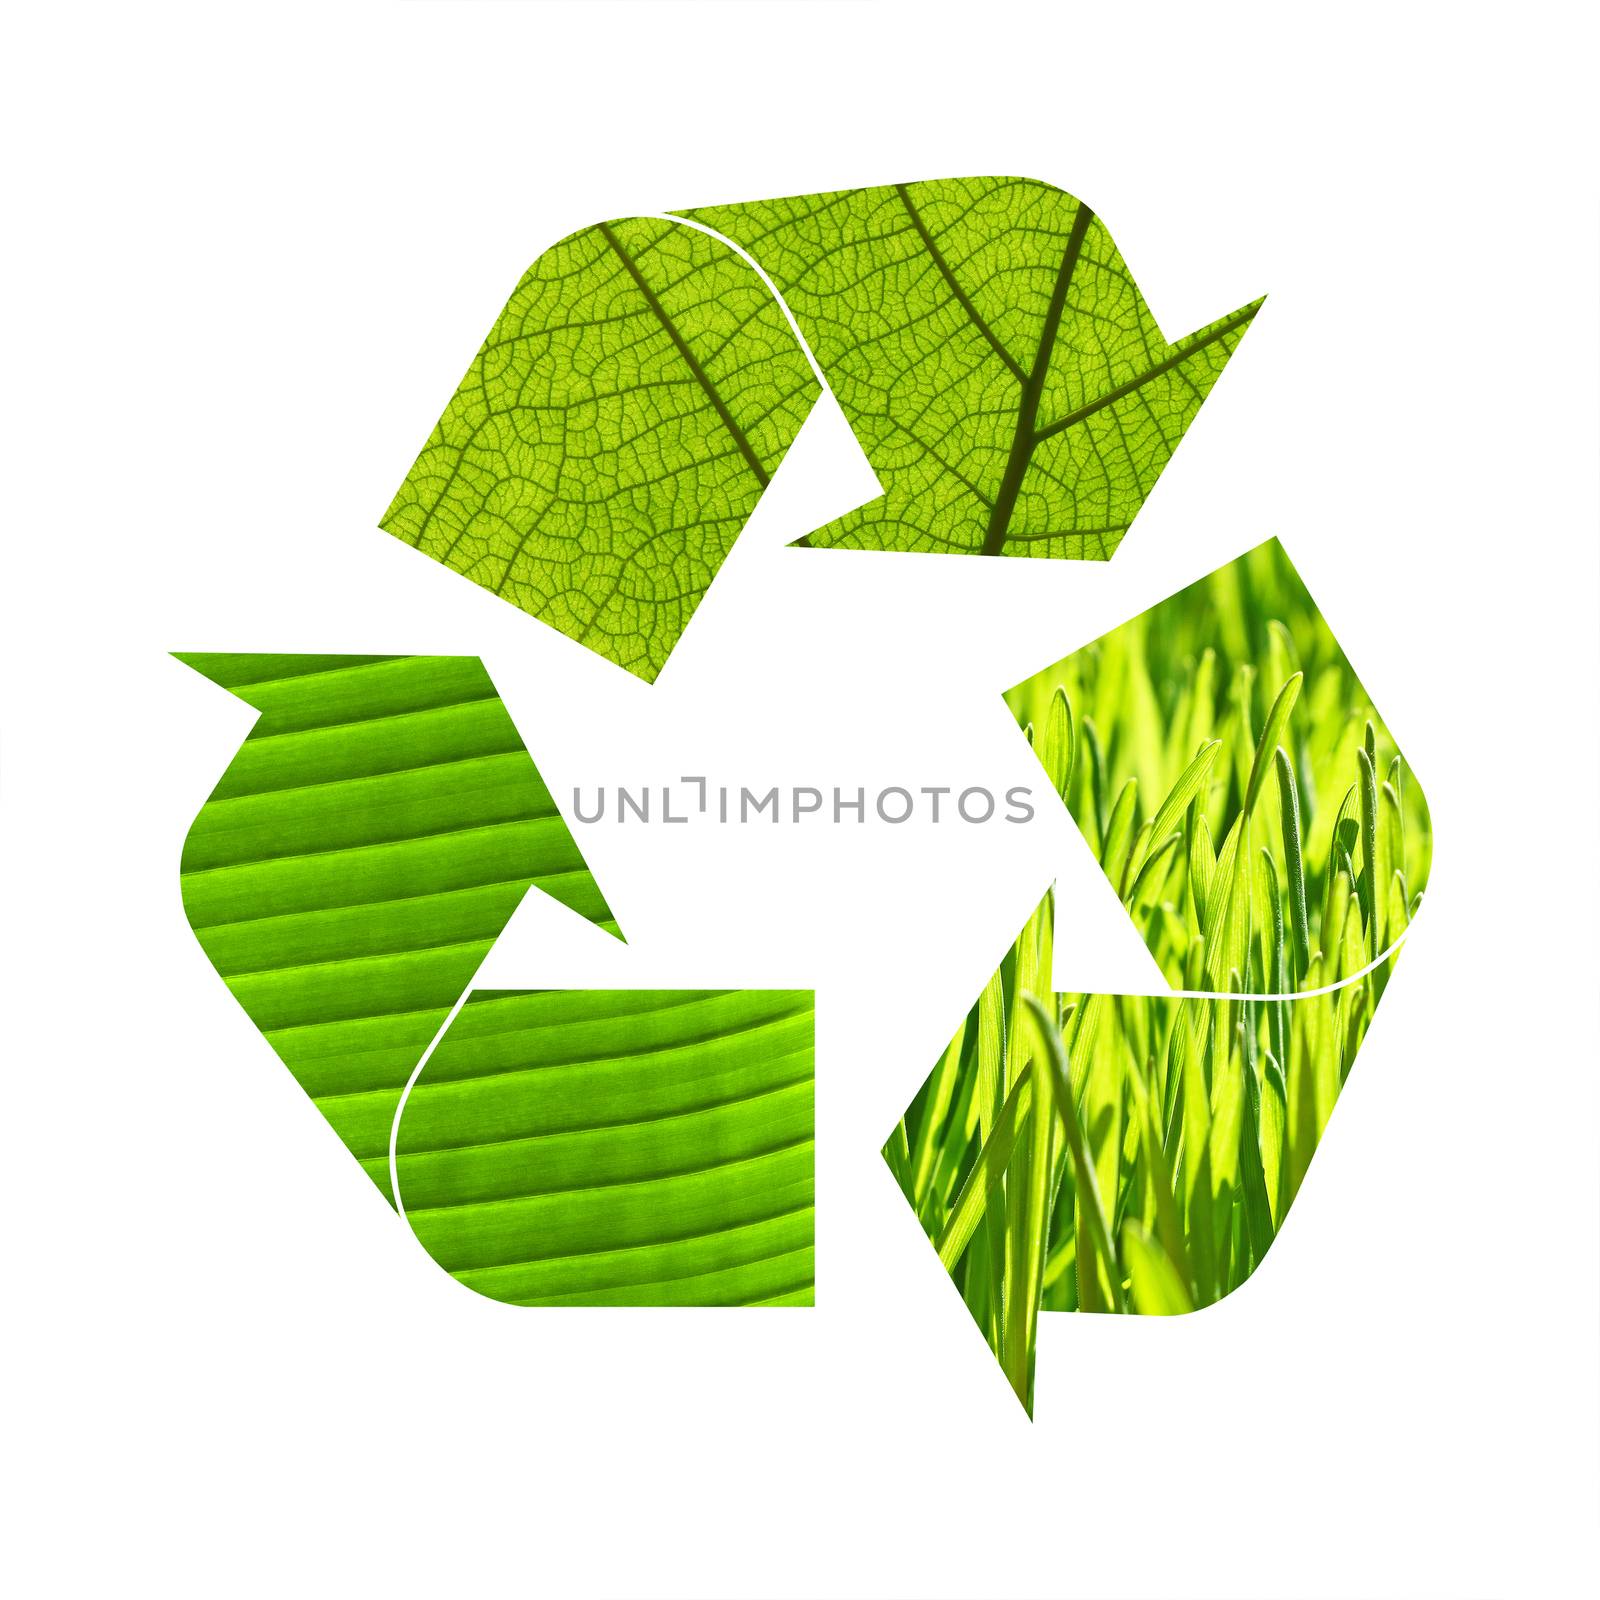 Illustration recycling symbol of green grass and leaves foliage isolated on white background